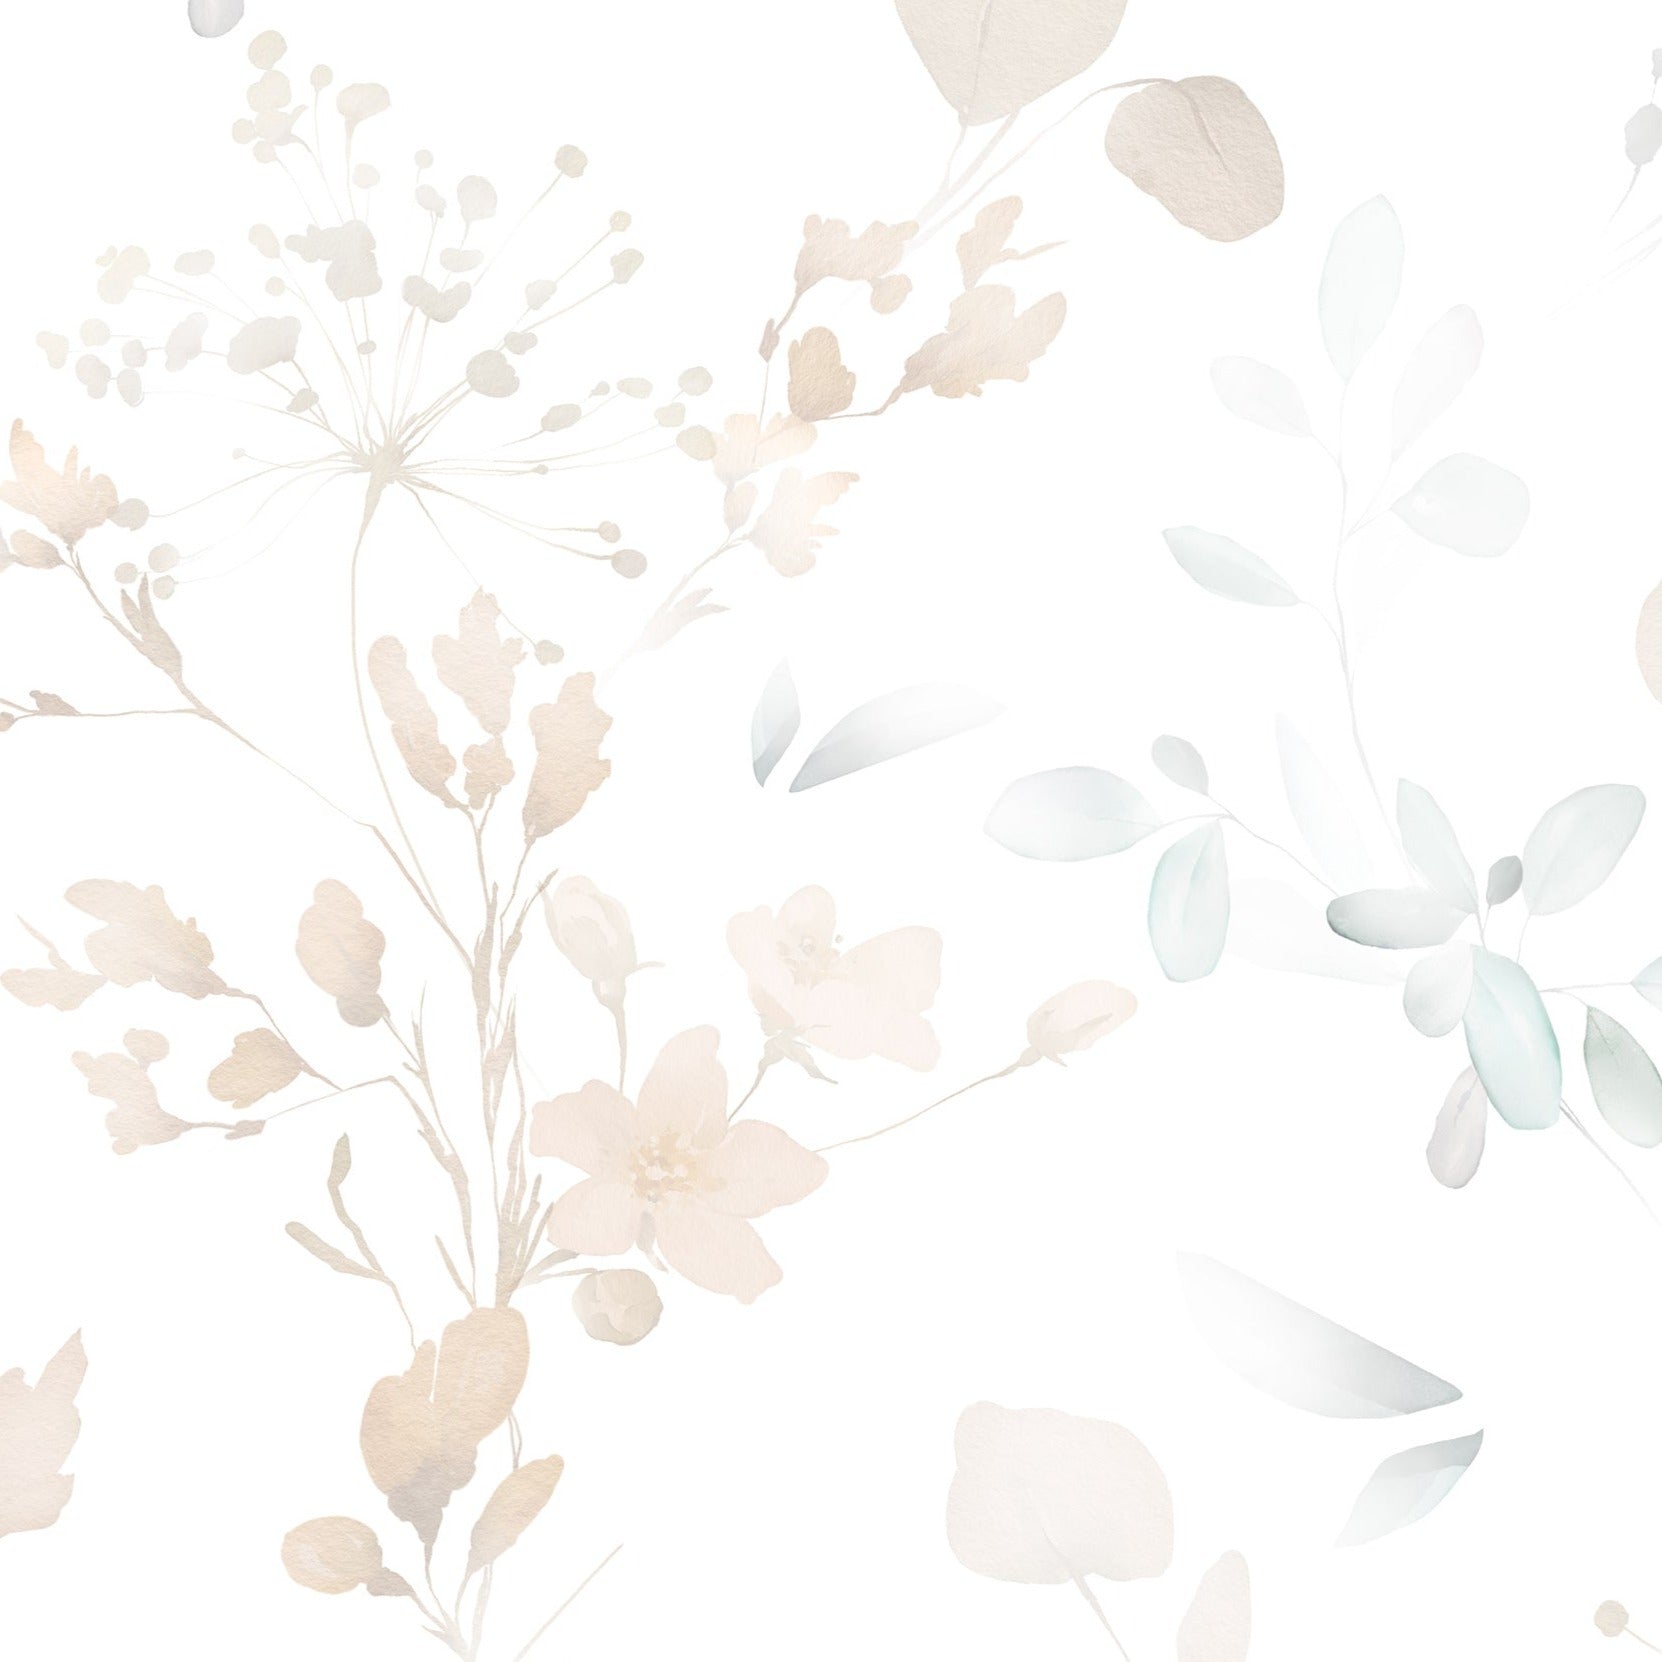 A delicate and soft watercolor wallpaper design featuring a mix of floral and herbal motifs in subtle shades of beige, taupe, and soft blues. The design is spread evenly across a clean white background, creating a tranquil and airy feel. The elements appear as if gently painted with watercolors, emphasizing a fresh and serene aesthetic.